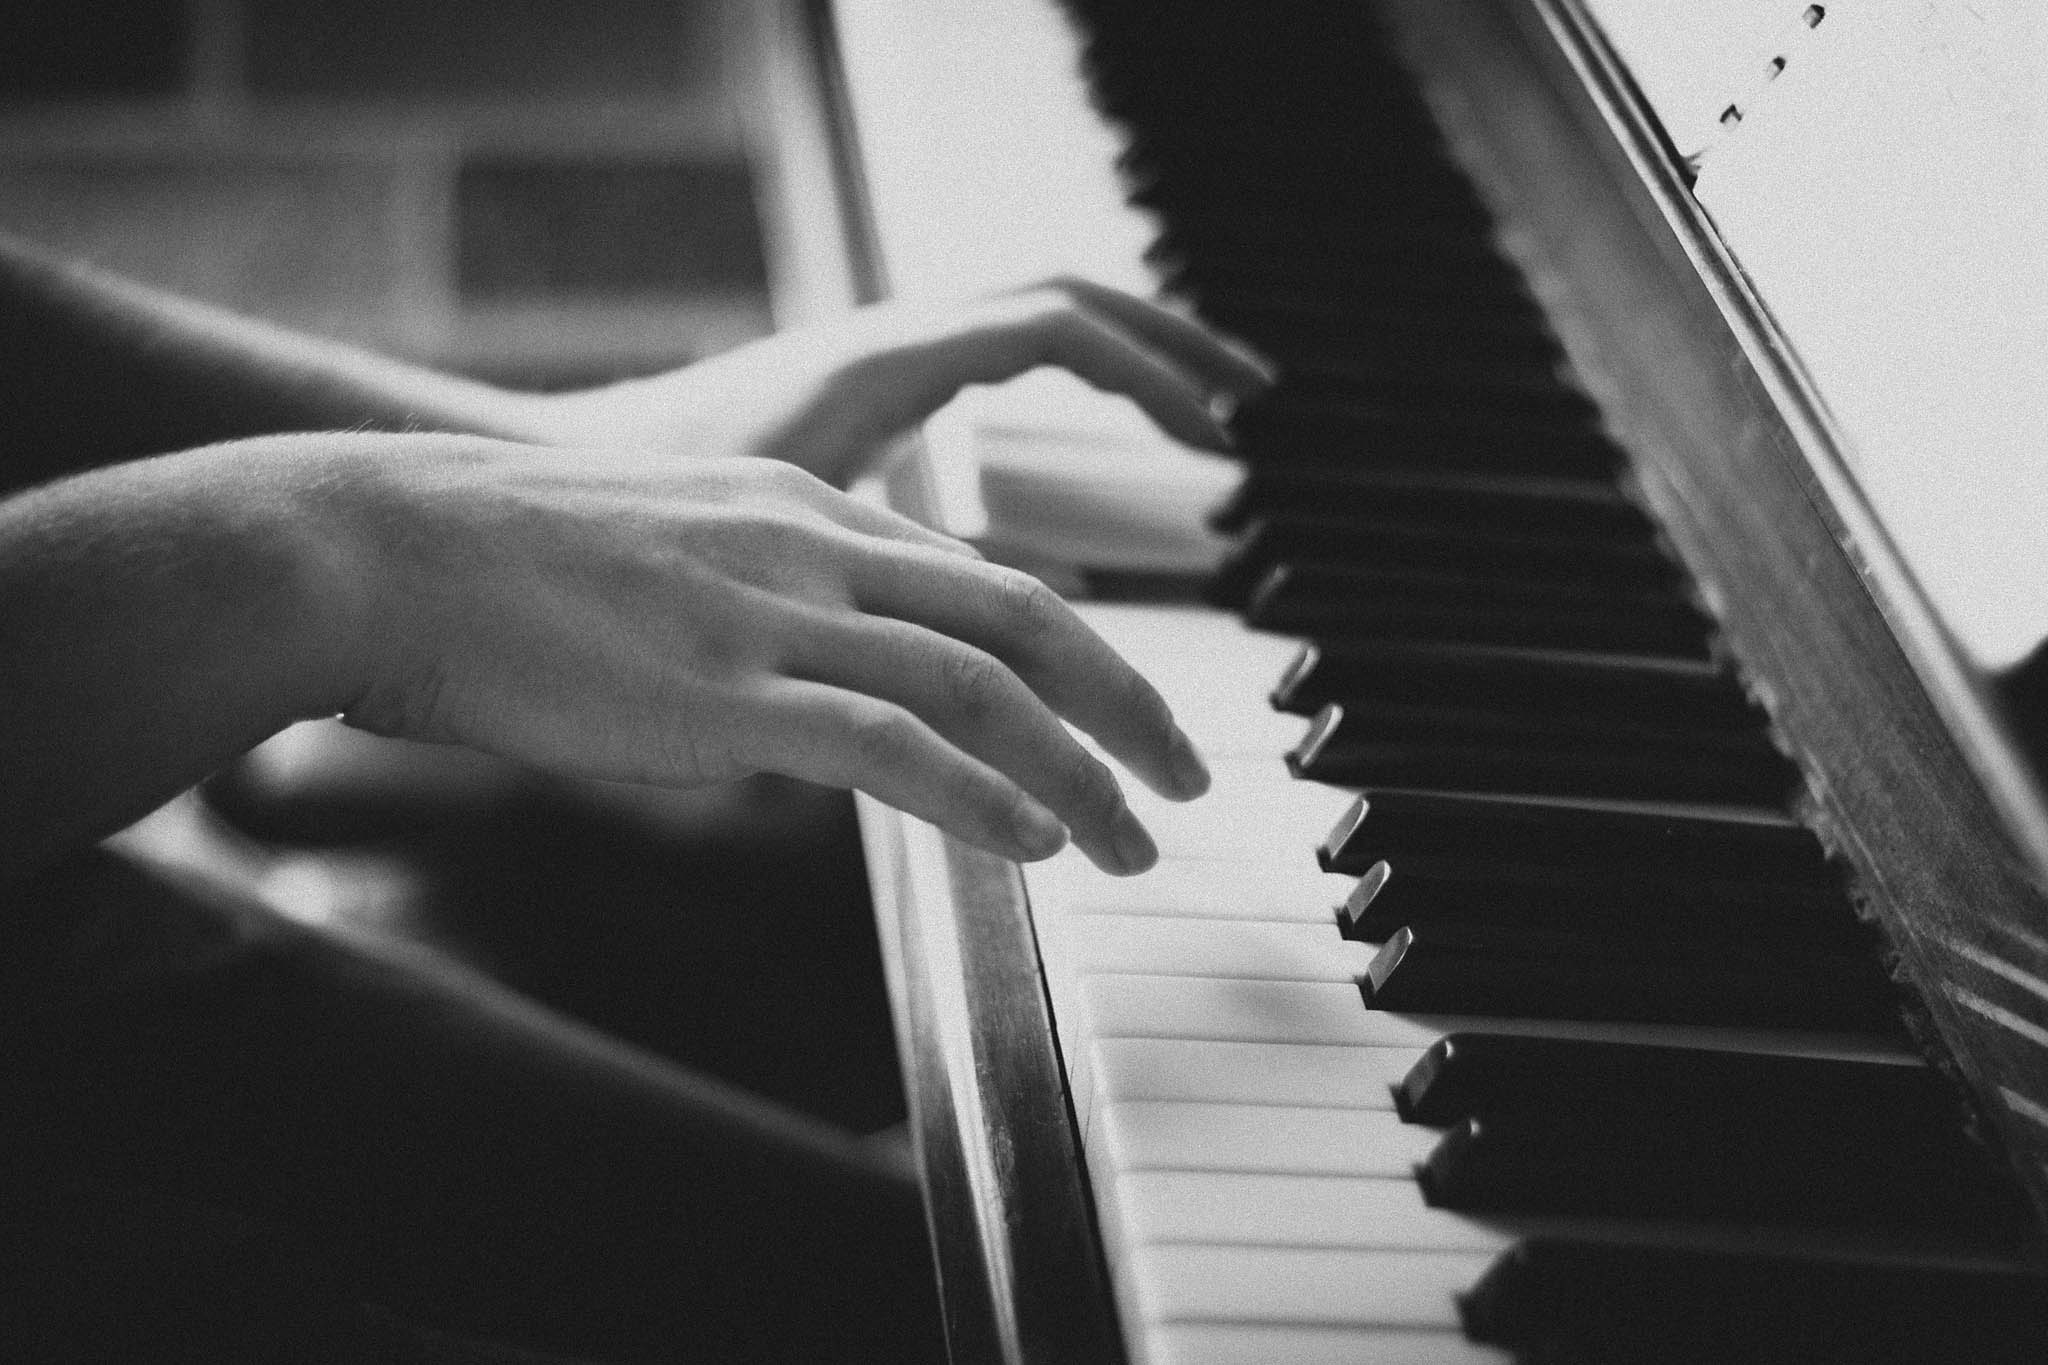 Listening to Daughter play the piano each morning soothes my soul...